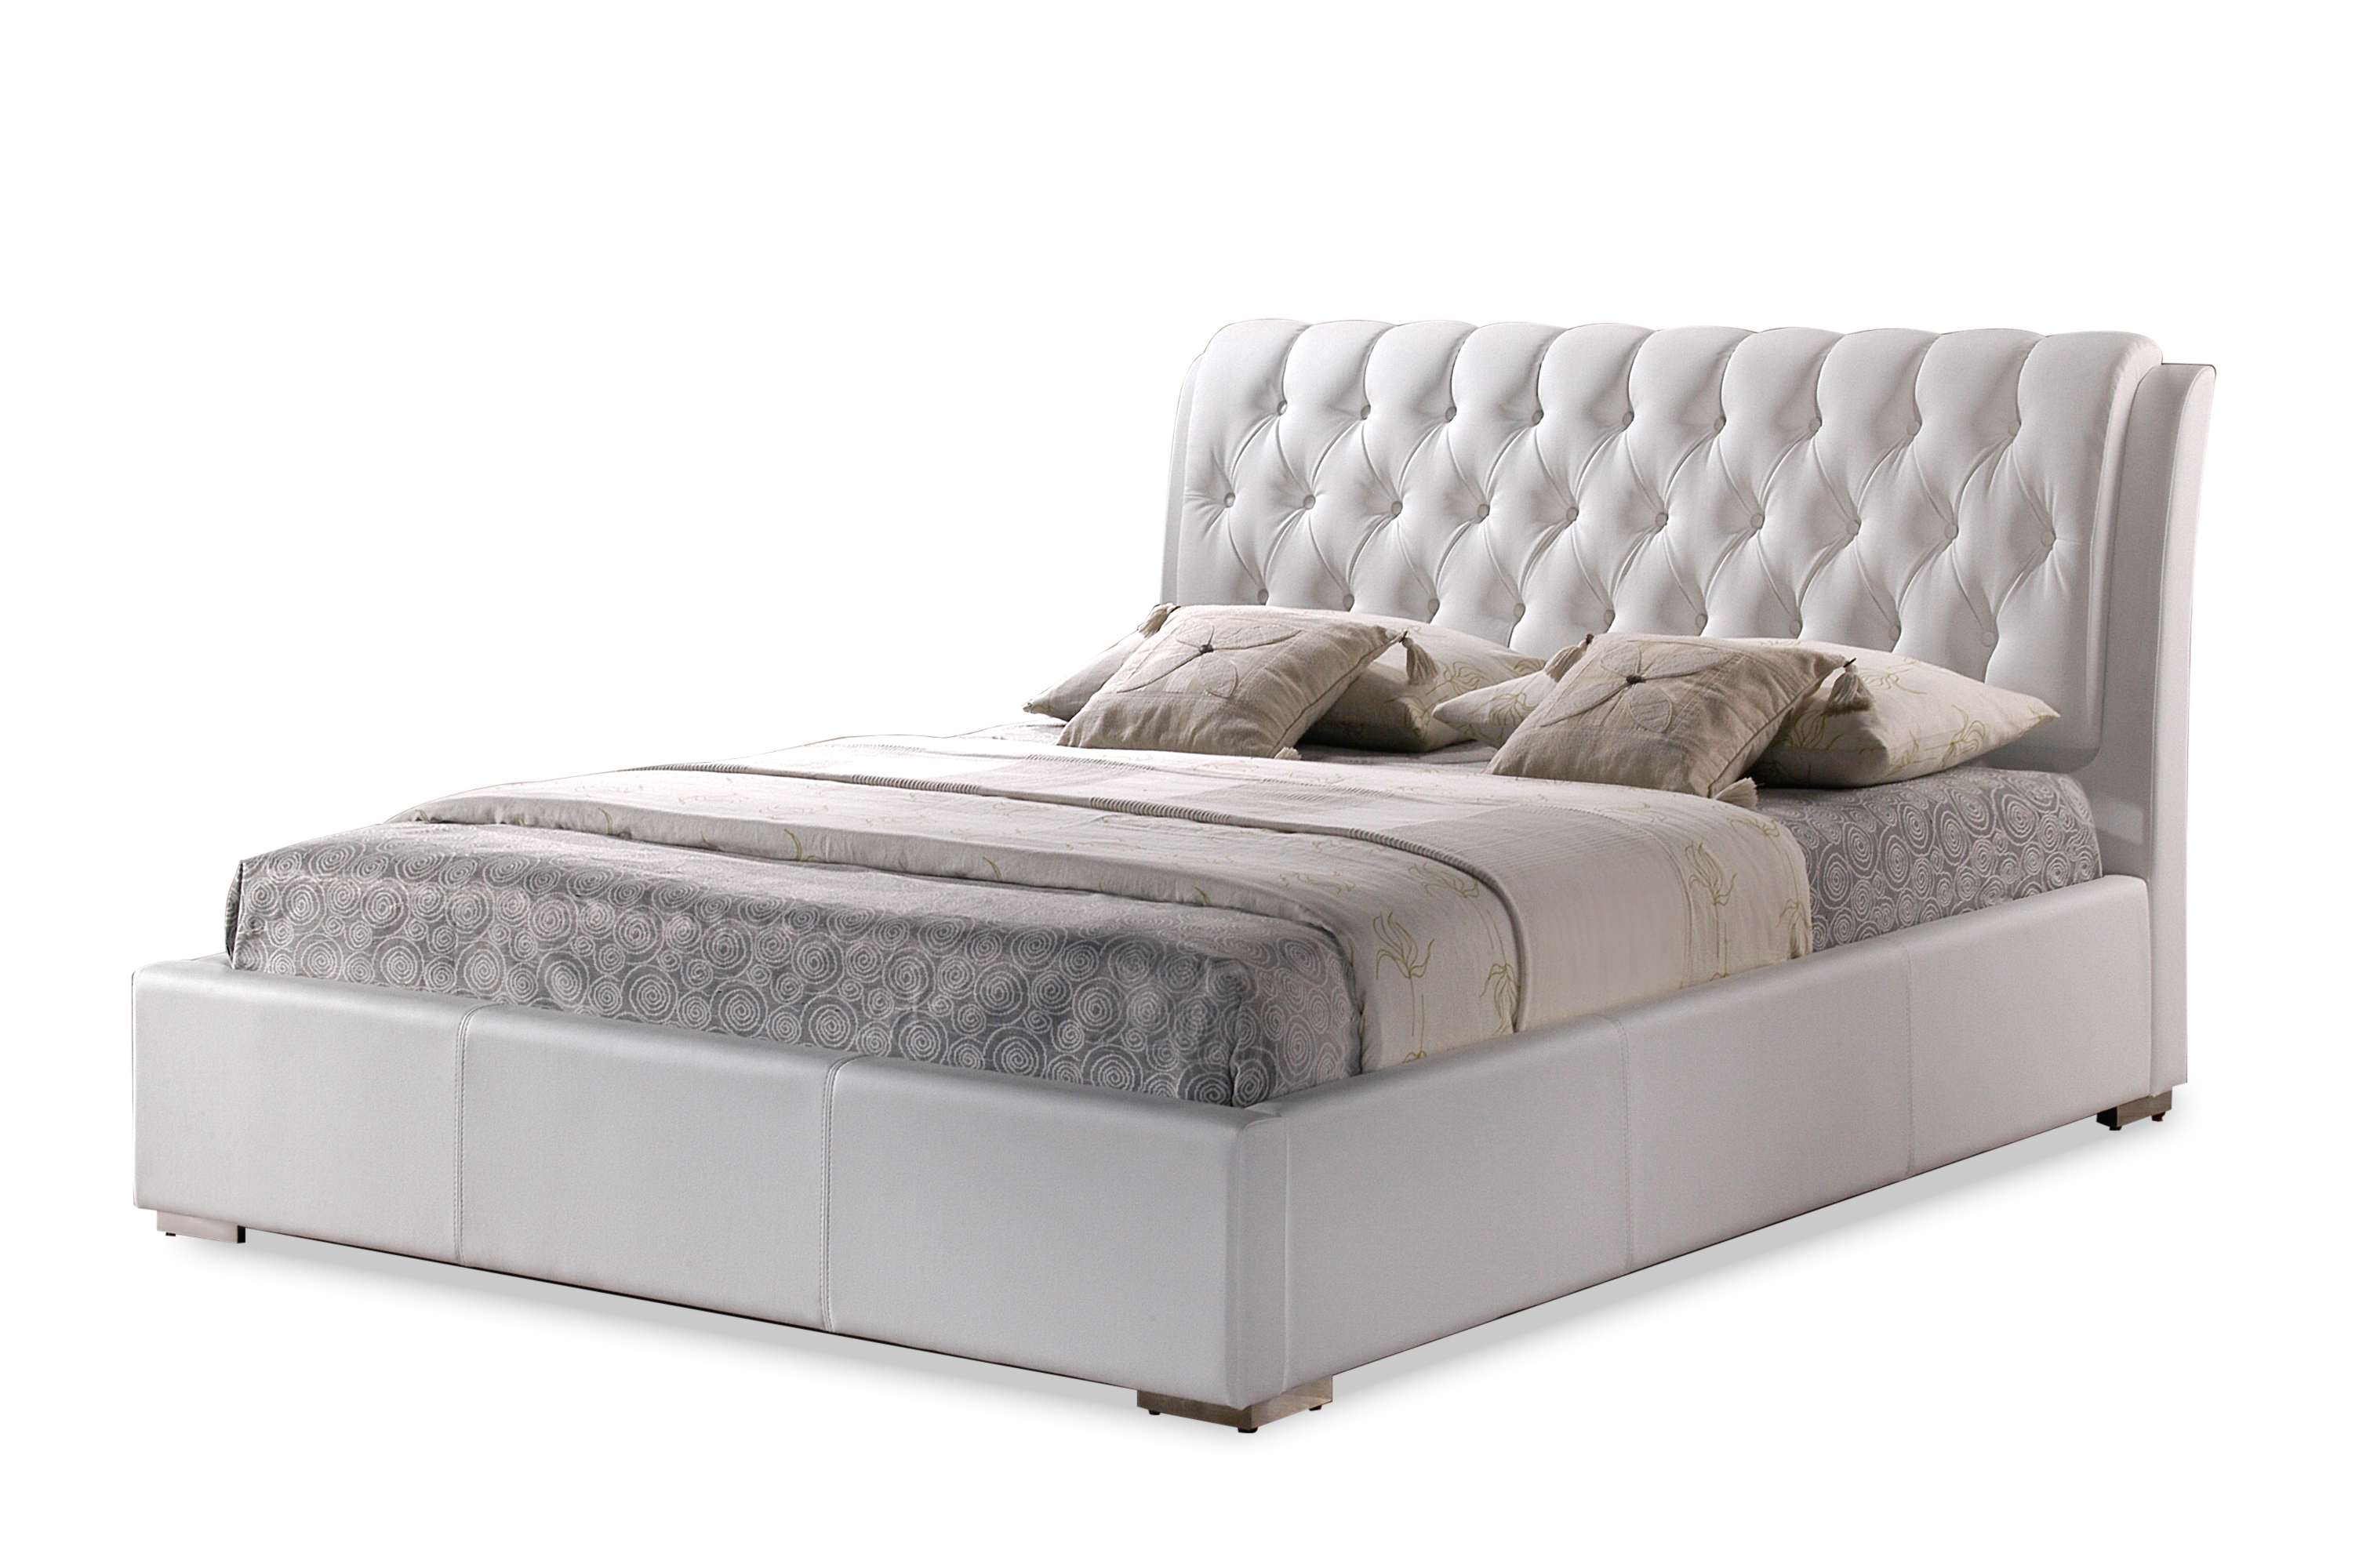 Bianca White Modern Bed With Tufted Headboard King Size